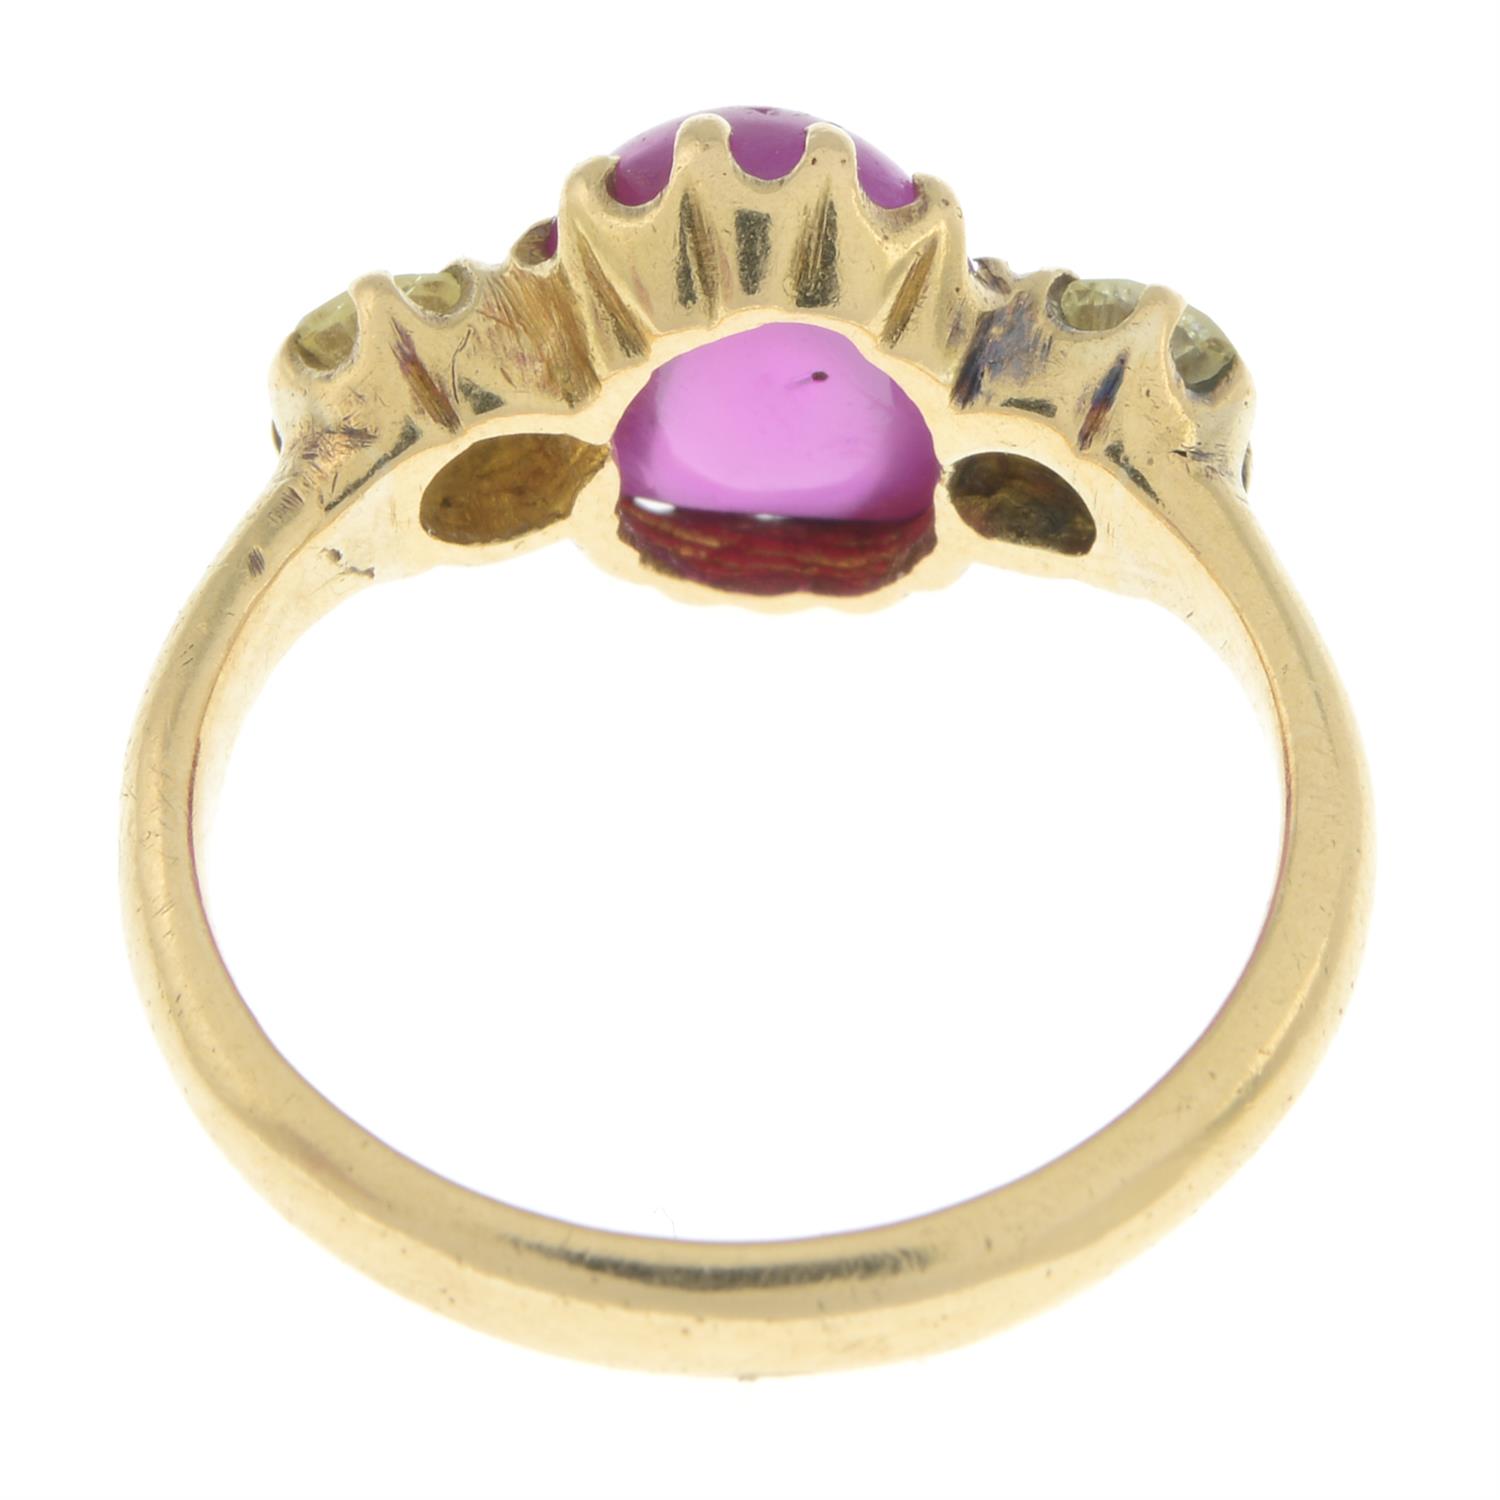 Late 19th century 18ct gold Burmese ruby and diamond ring - Image 3 of 5